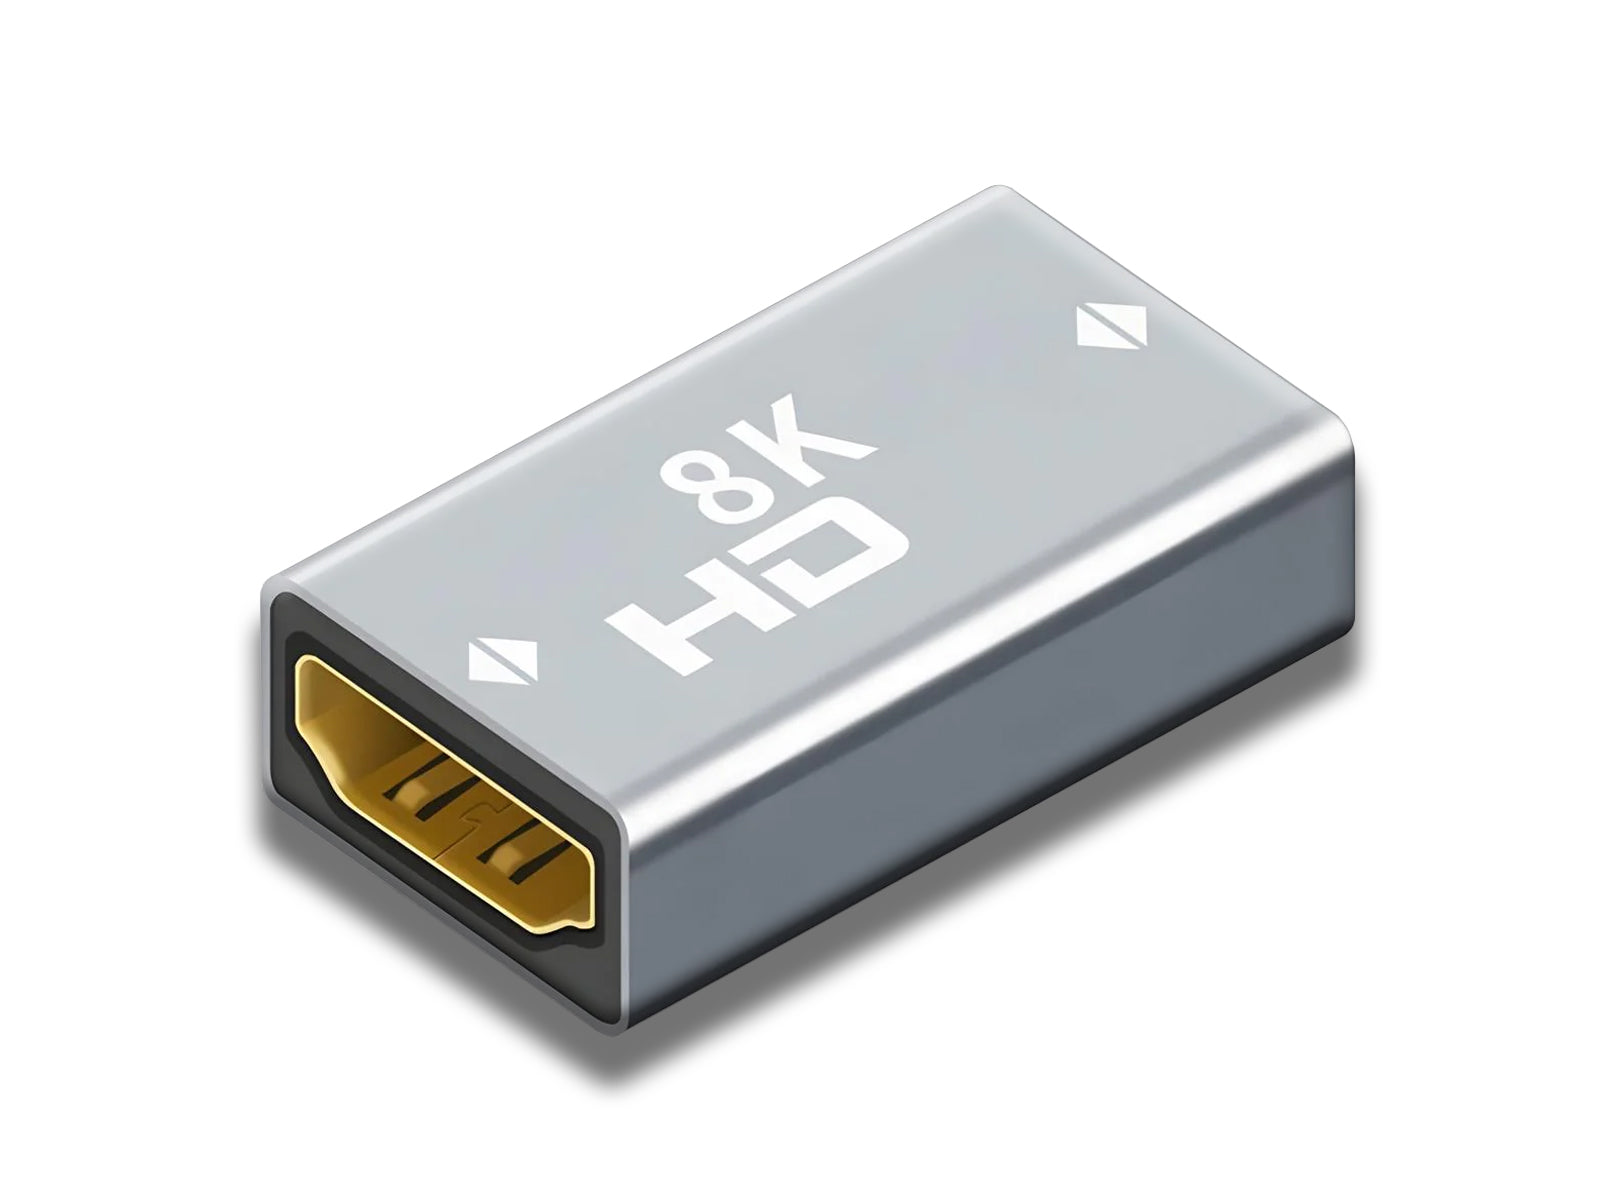 Top-view-image-of-the-female-to-female-8K-HDMI-Joiner-on-the-white-background